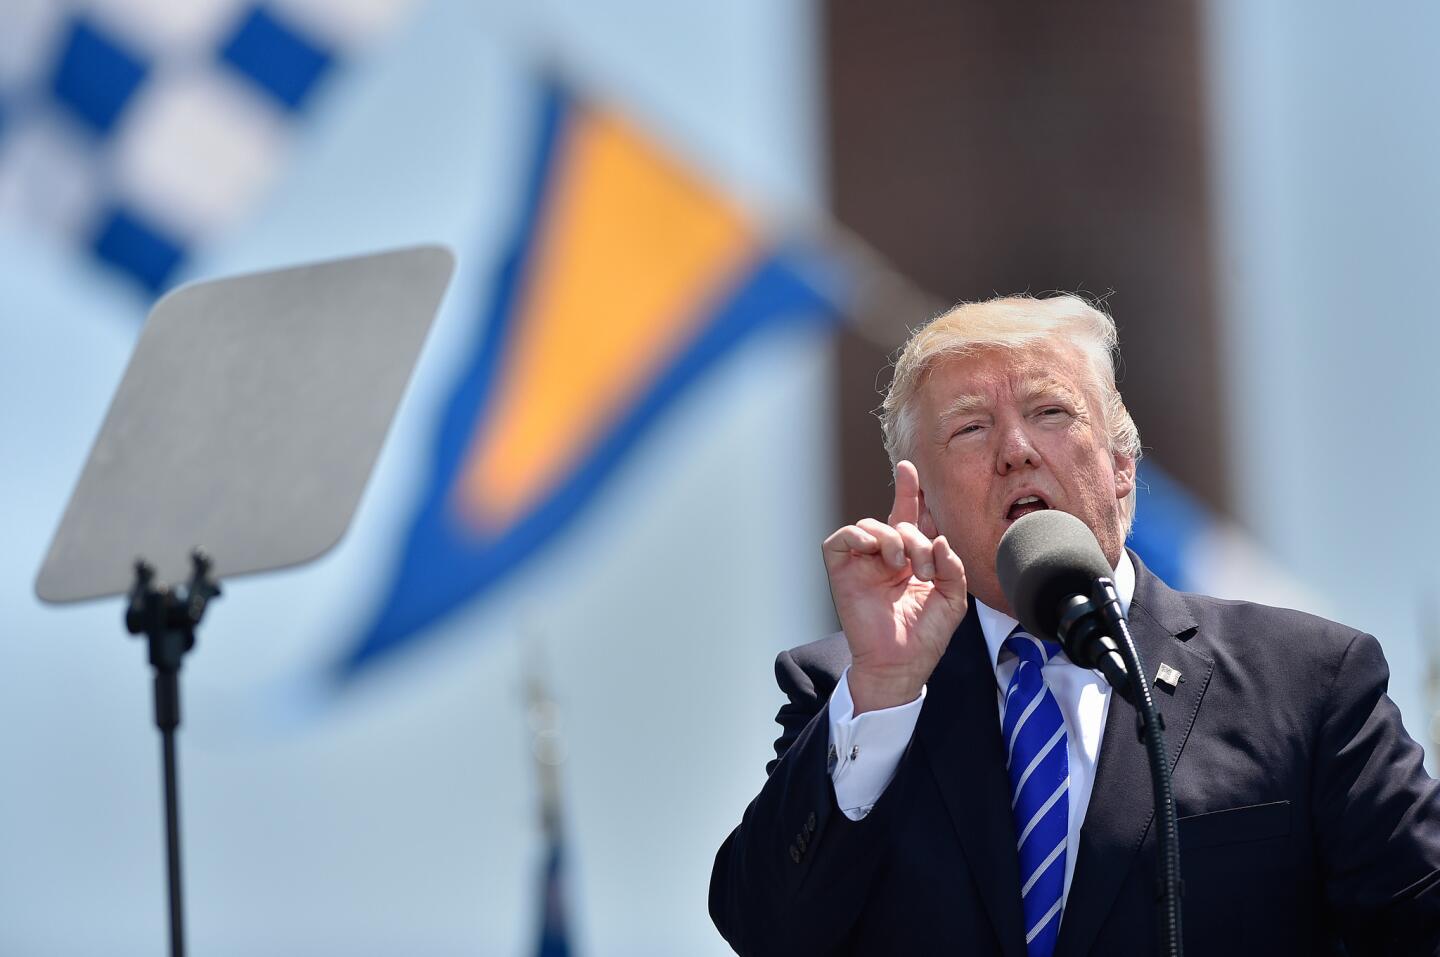 President Donald Trump gives the commencement address at the United States Coast Guard Academy's 136th commencement exercises Wednesday.